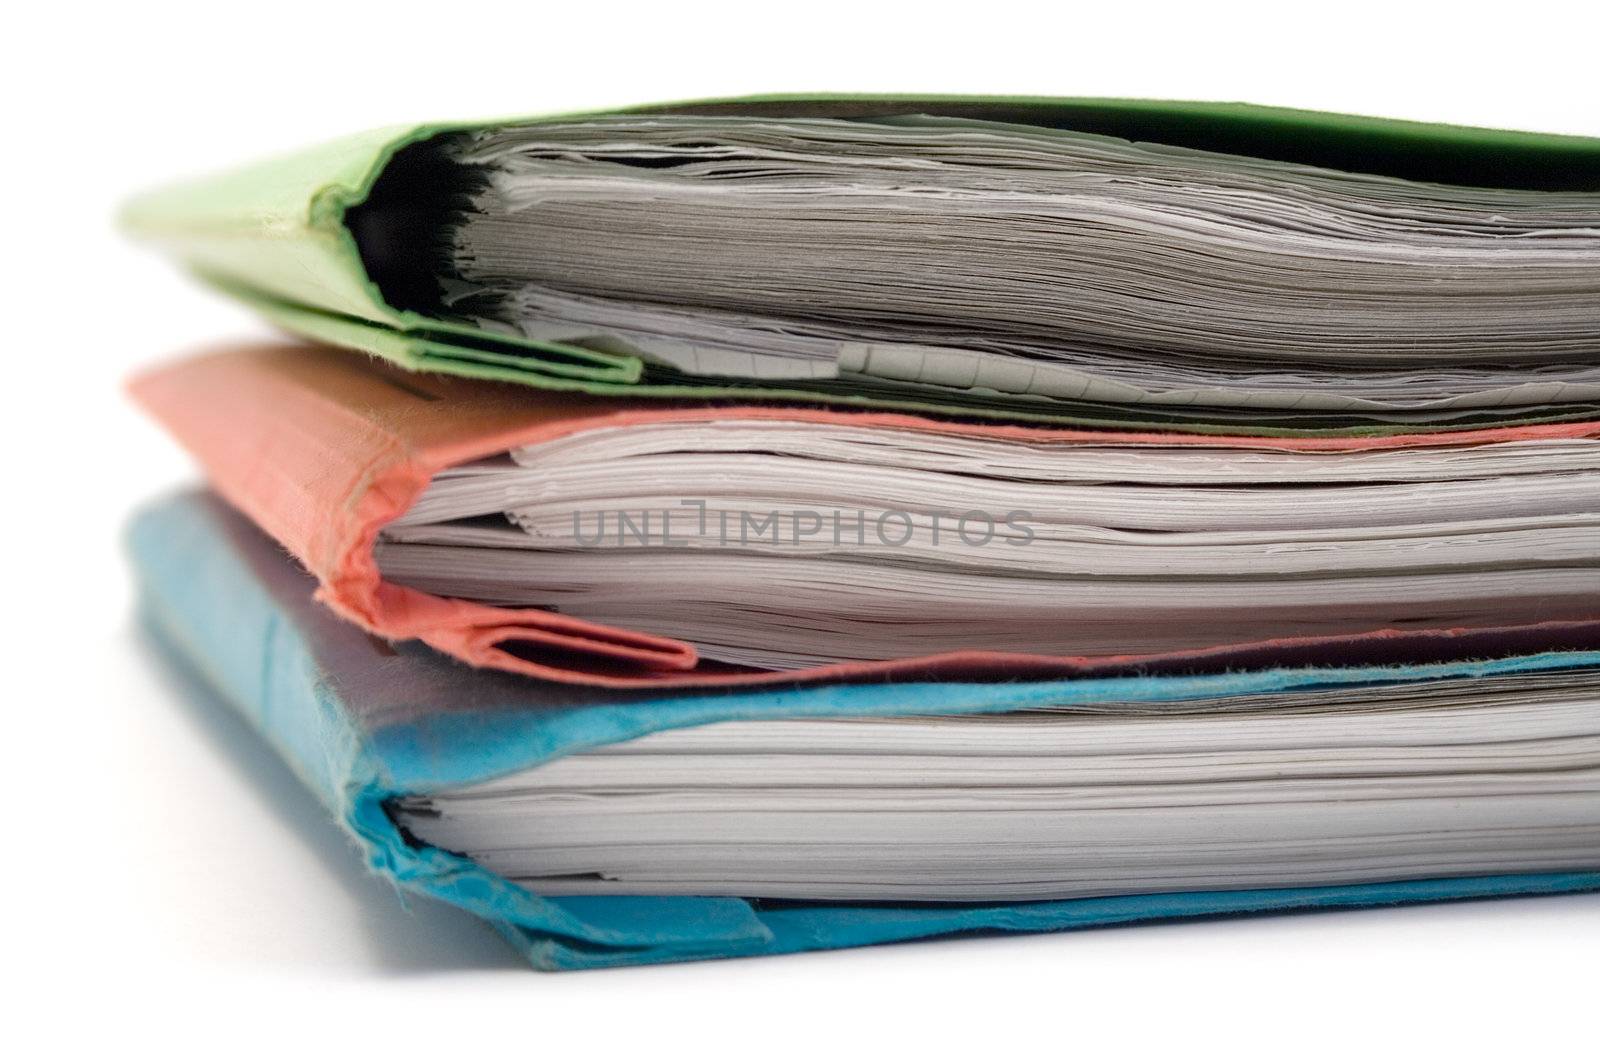 Colorful stacked binders full of documents. Isolated on a white background.